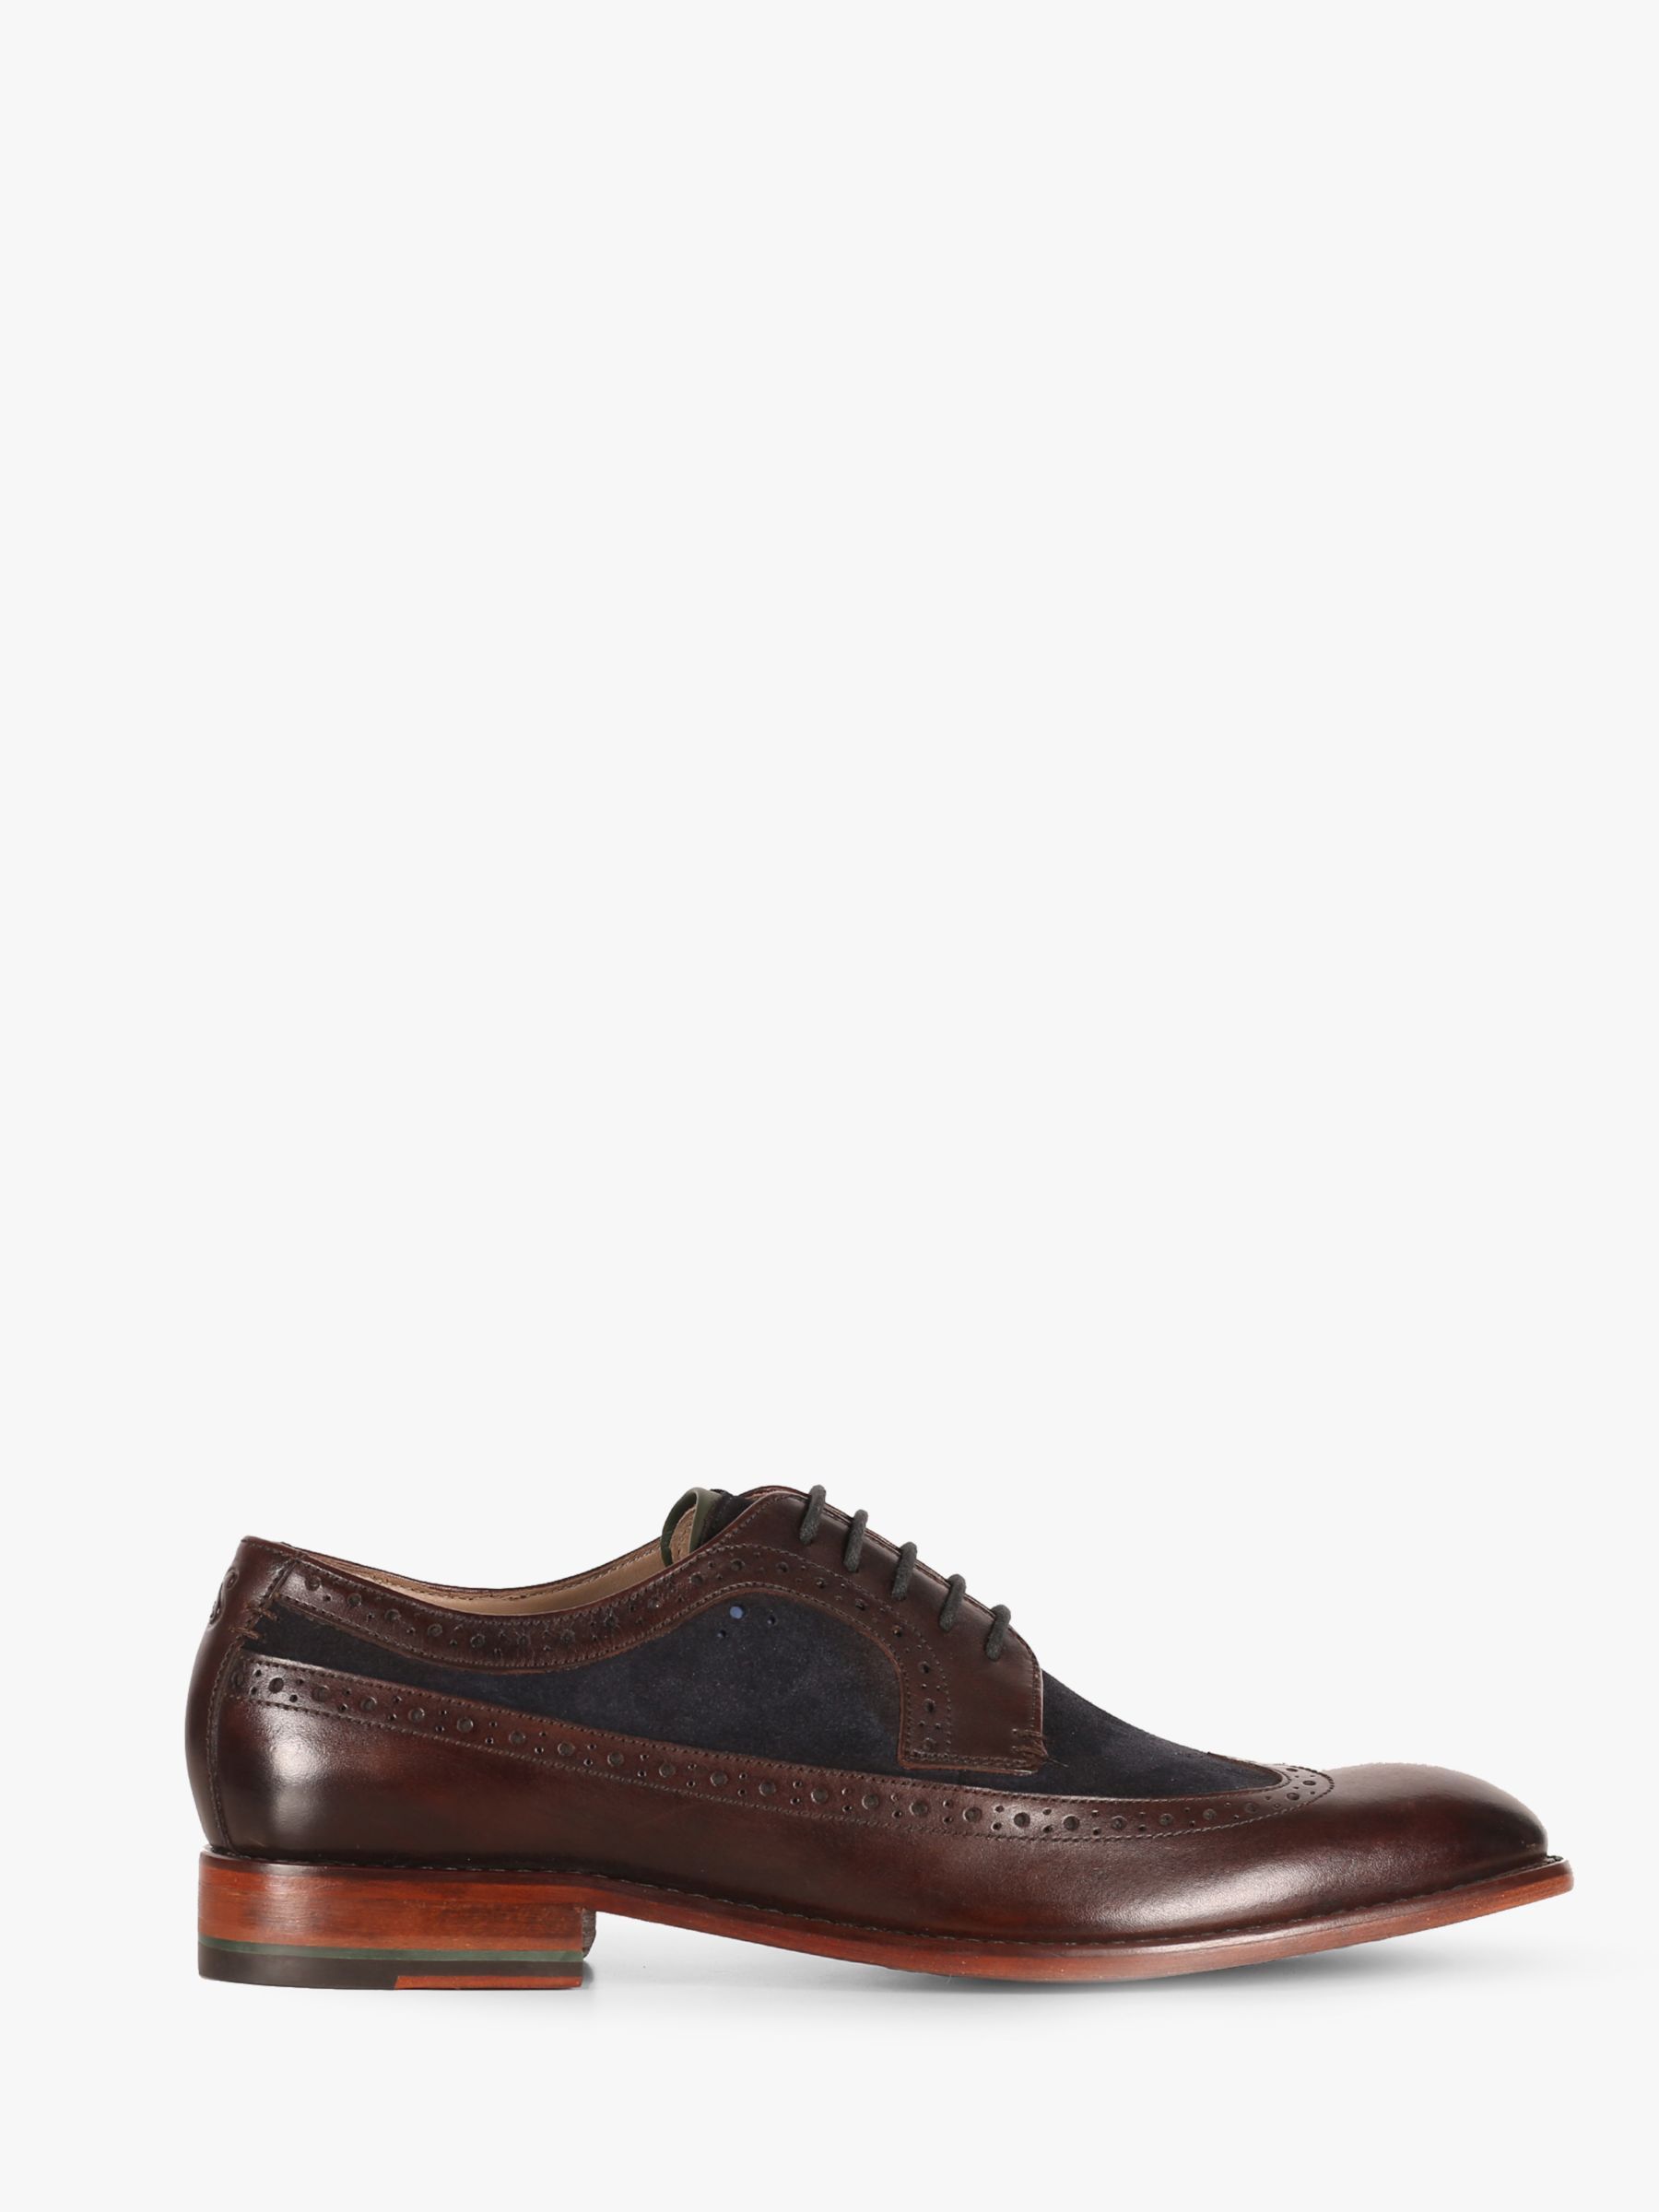 Oliver Sweeney Endellion Mixed Derby Shoes, Brown/Navy